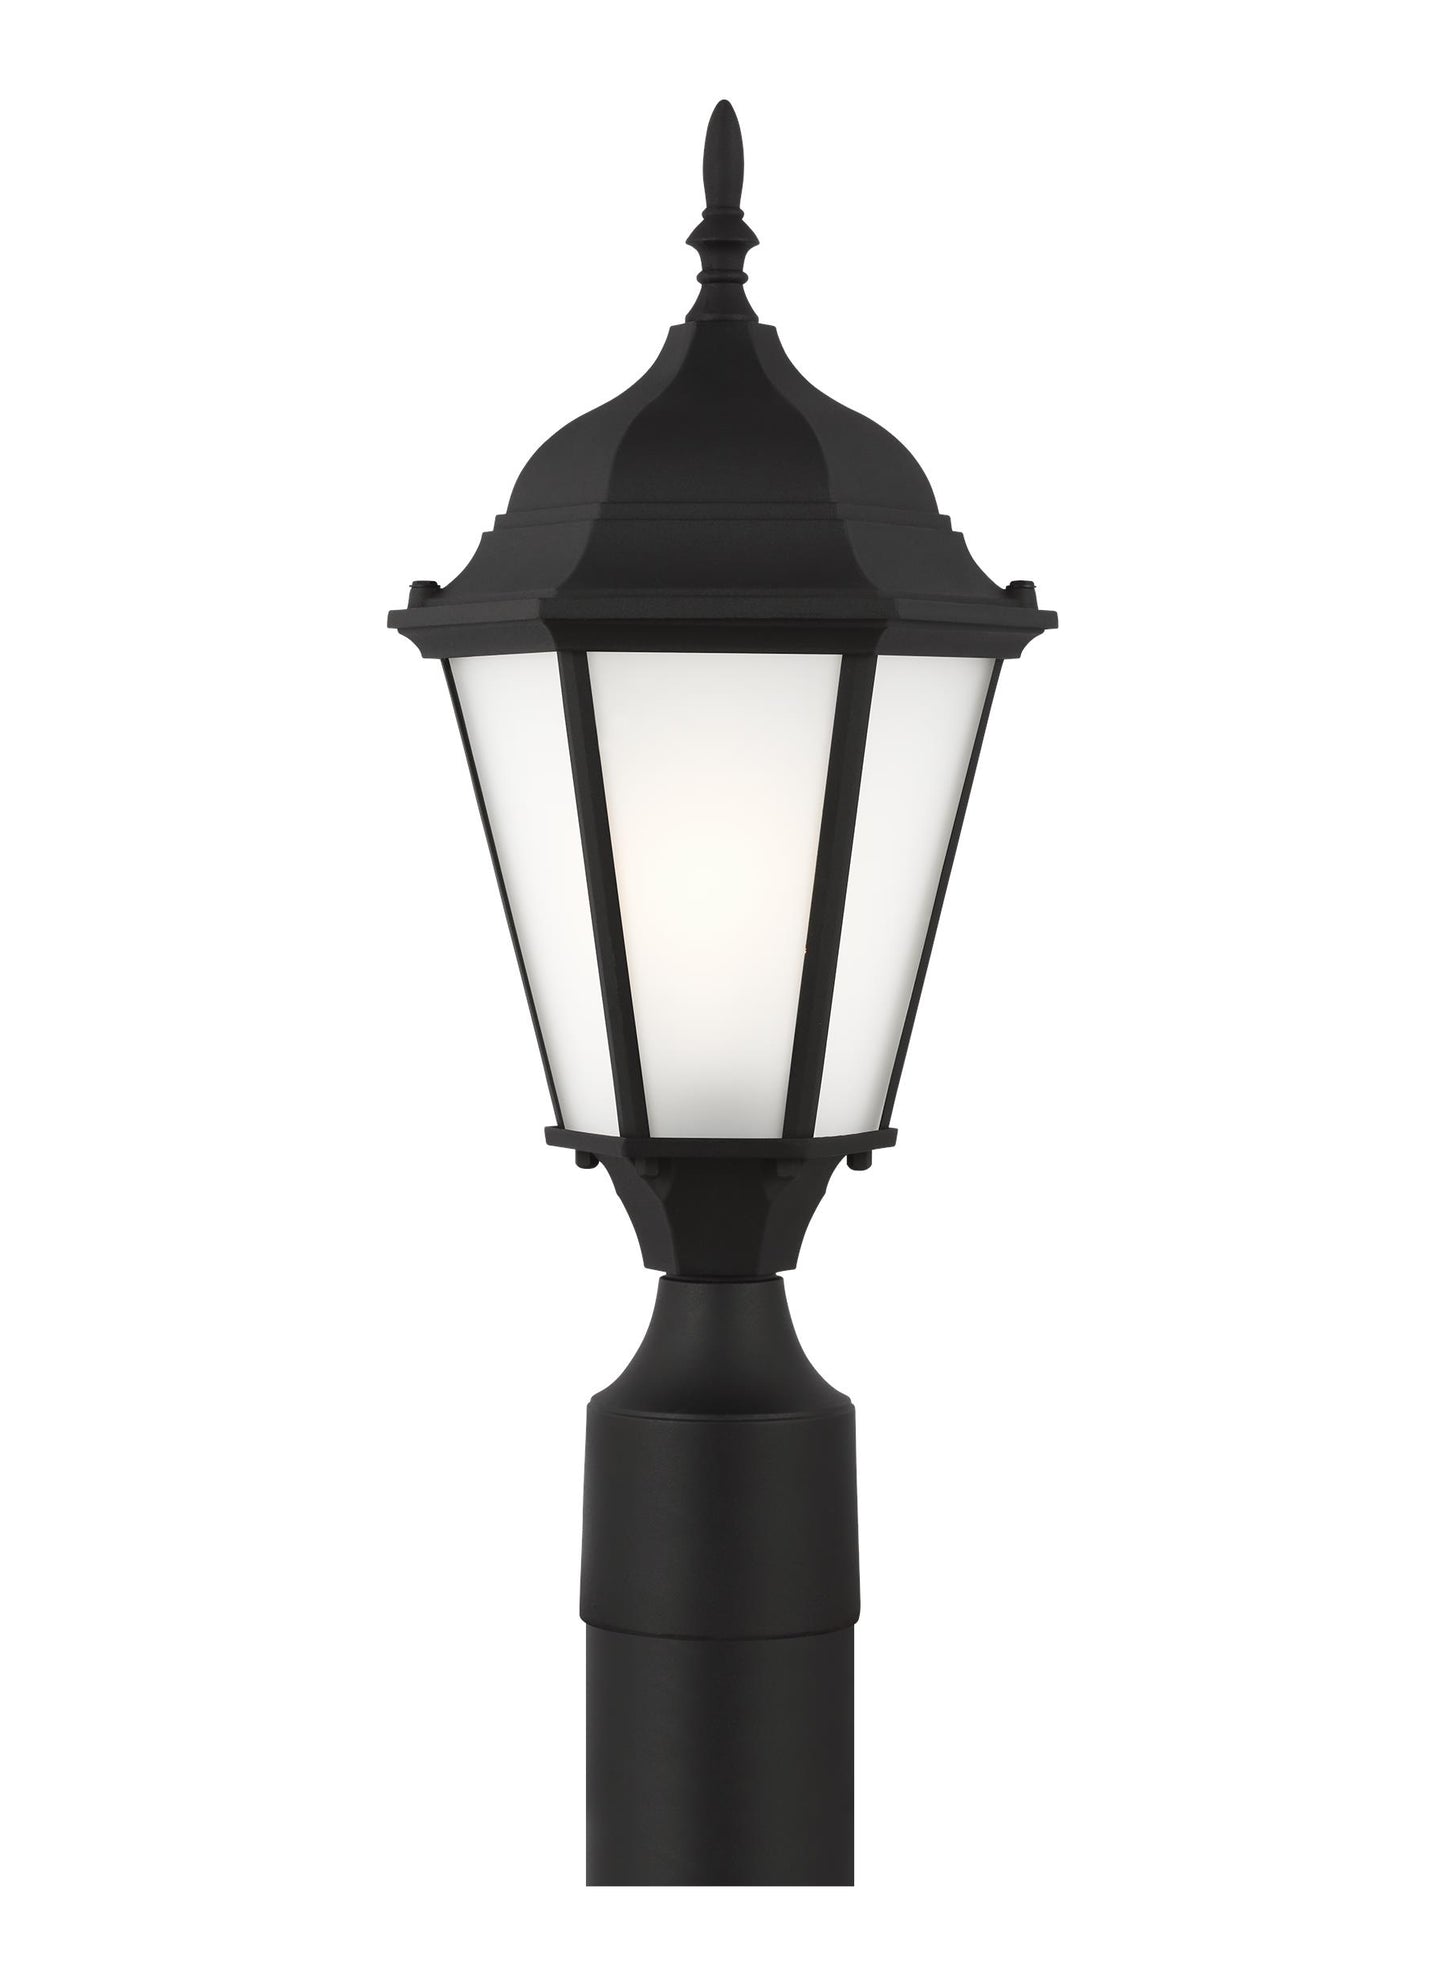 Bakersville traditional 1-light outdoor exterior post lantern in black finish with satin etched glass panels